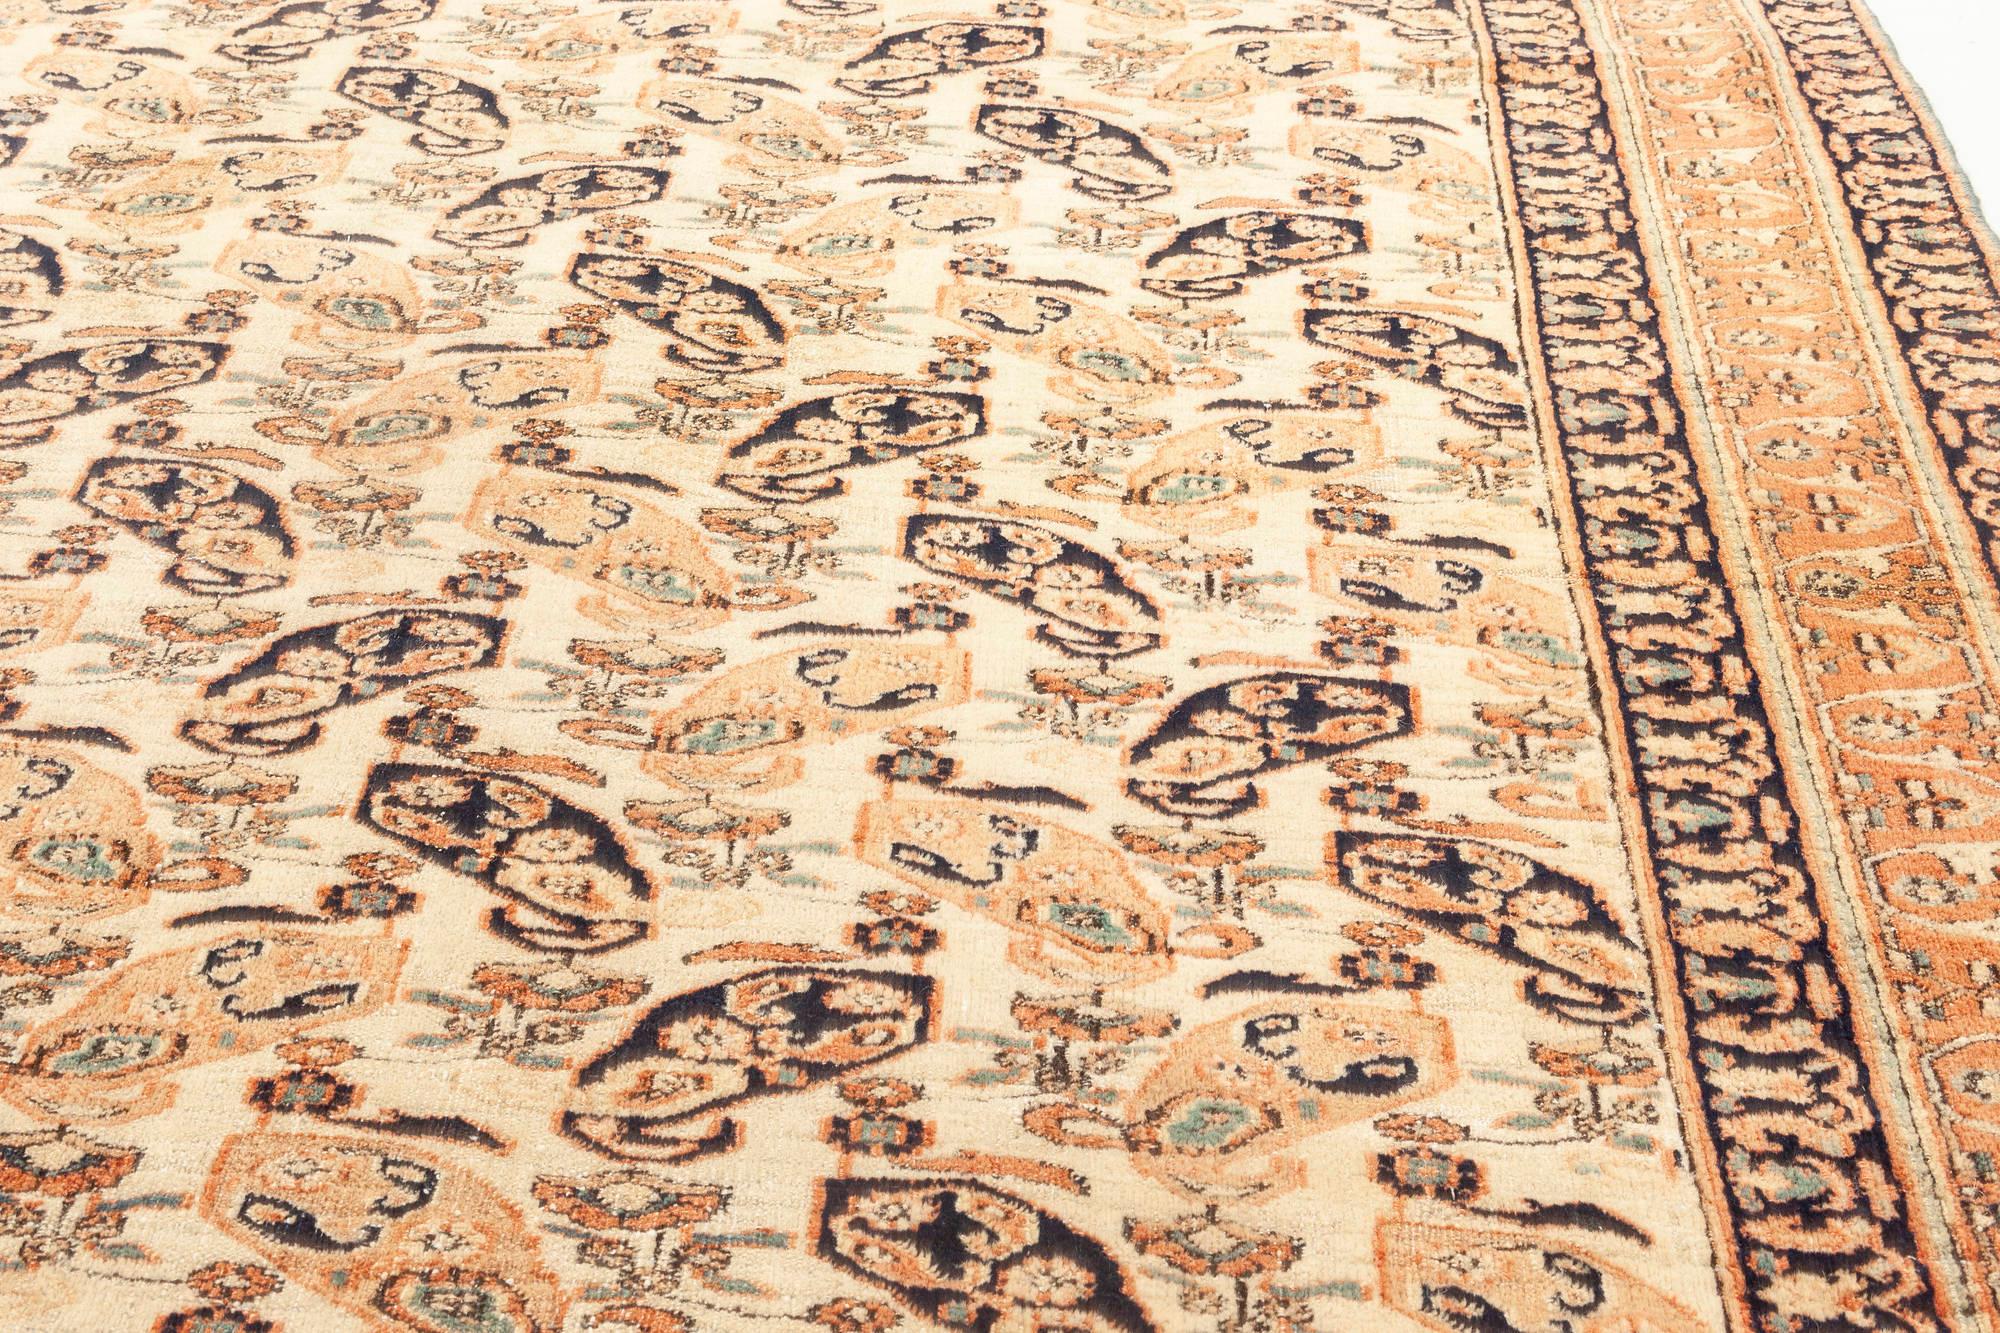 Early 20th Century Persian Tabriz Handmade Wool Rug In Good Condition For Sale In New York, NY